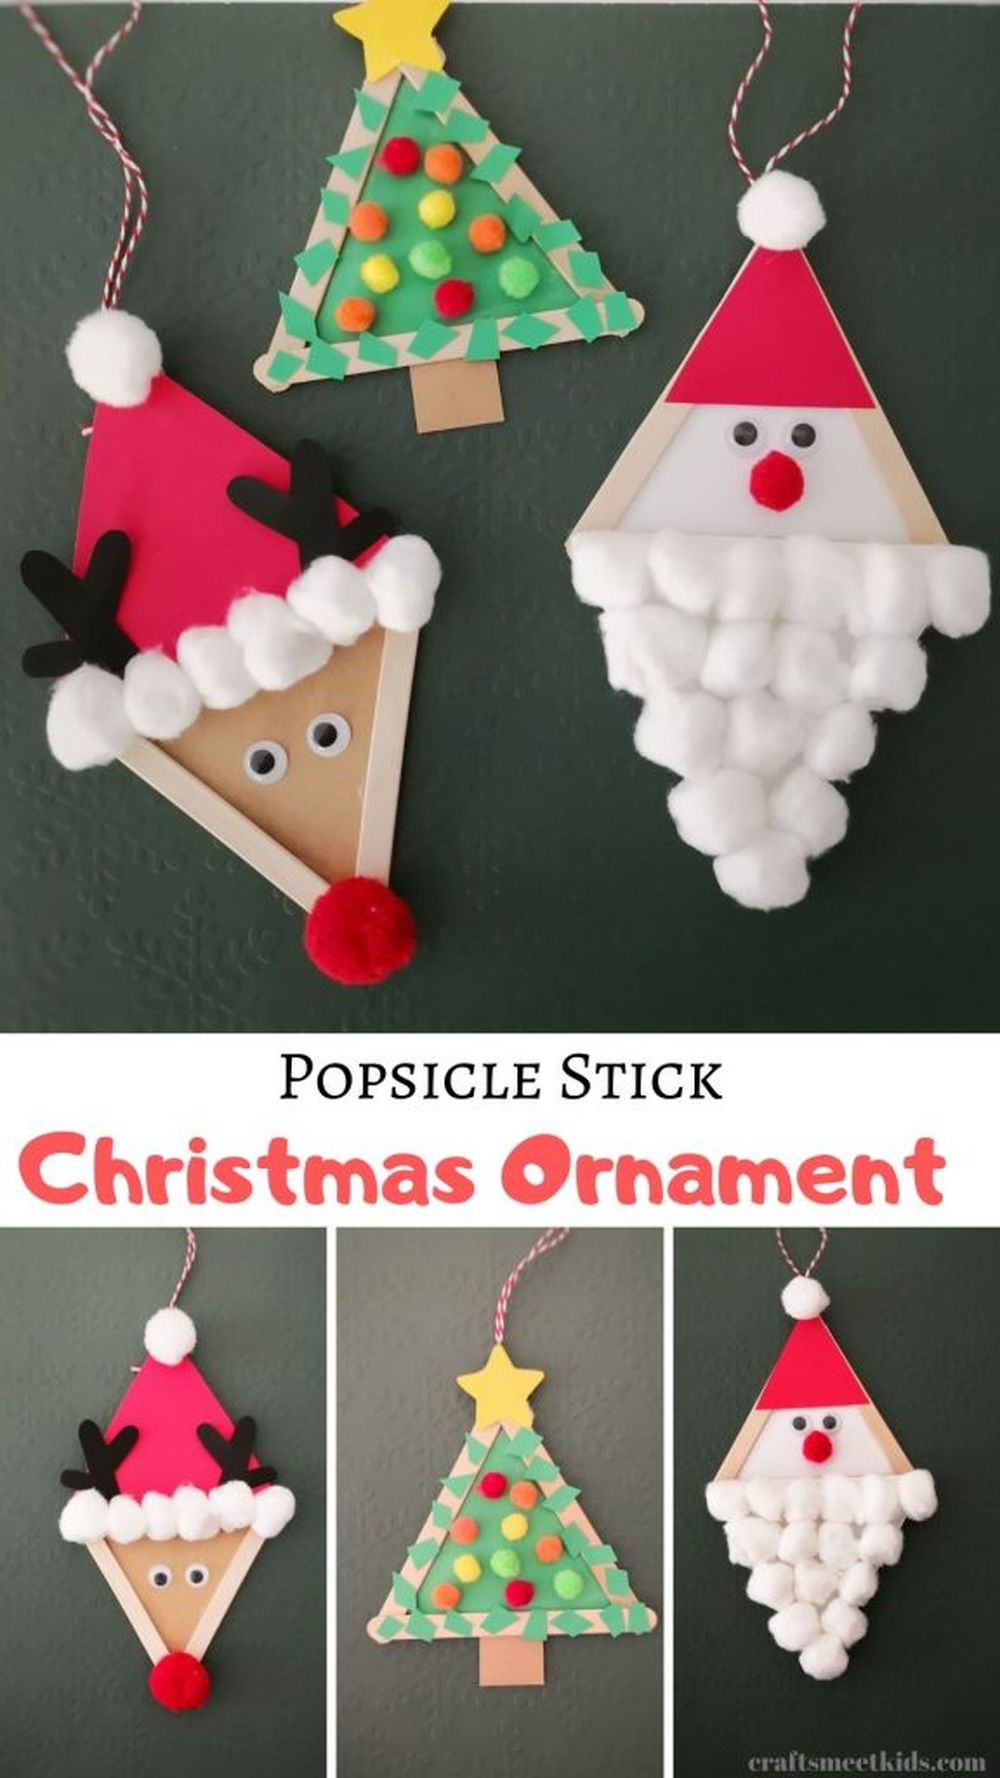 Popsicle stick ornaments christmas crafts